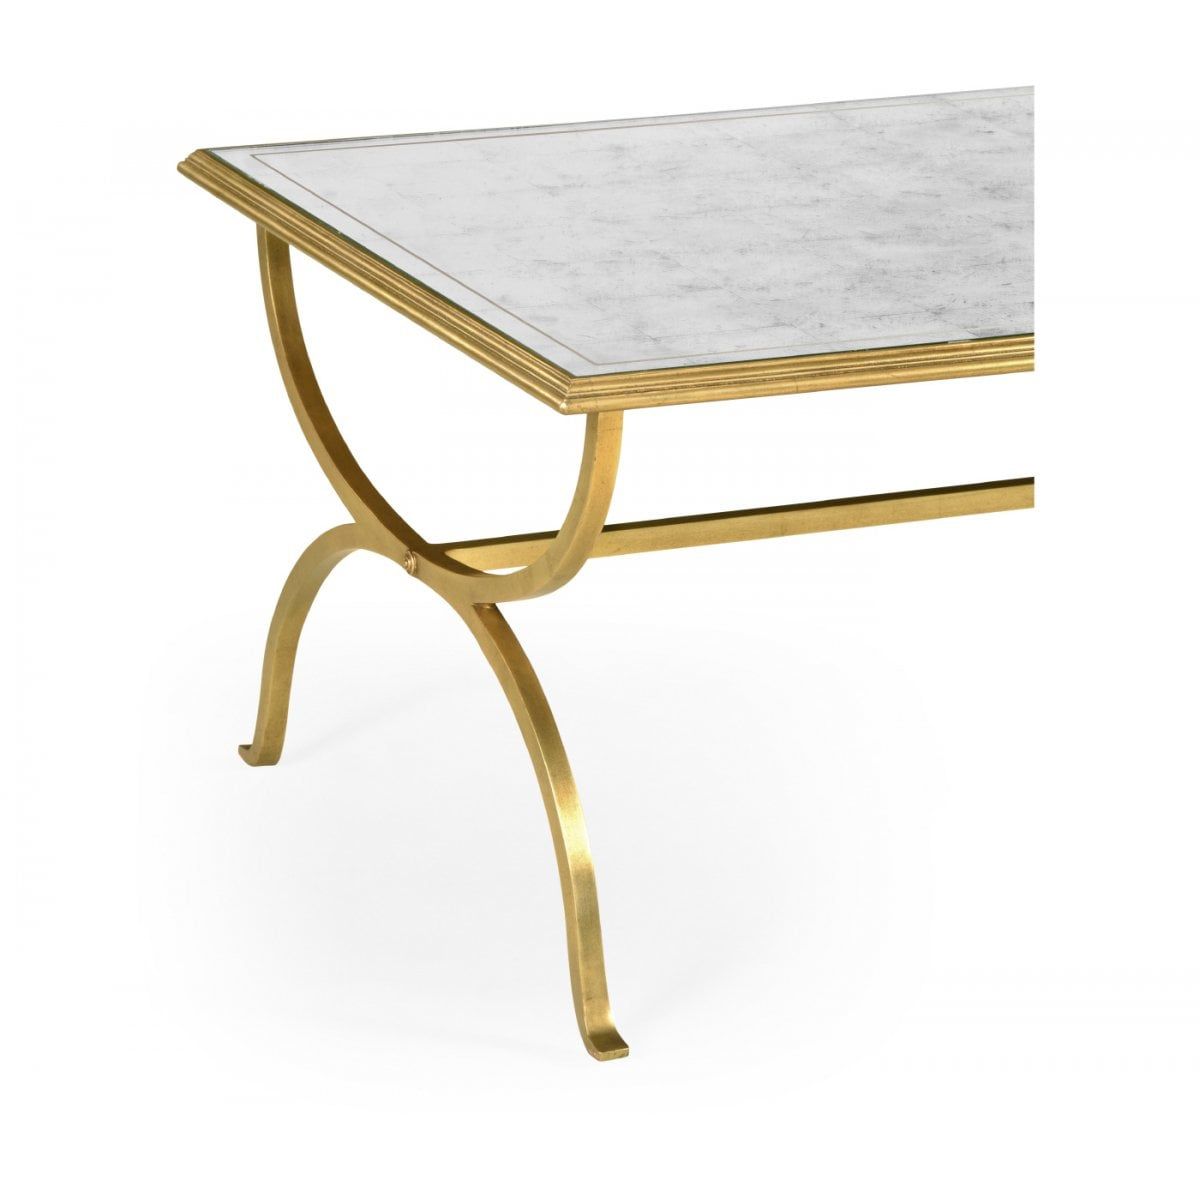 Rectangular Gold Coffee Table With Glass Top | Swanky With Geometric Glass Top Gold Coffee Tables (View 8 of 15)